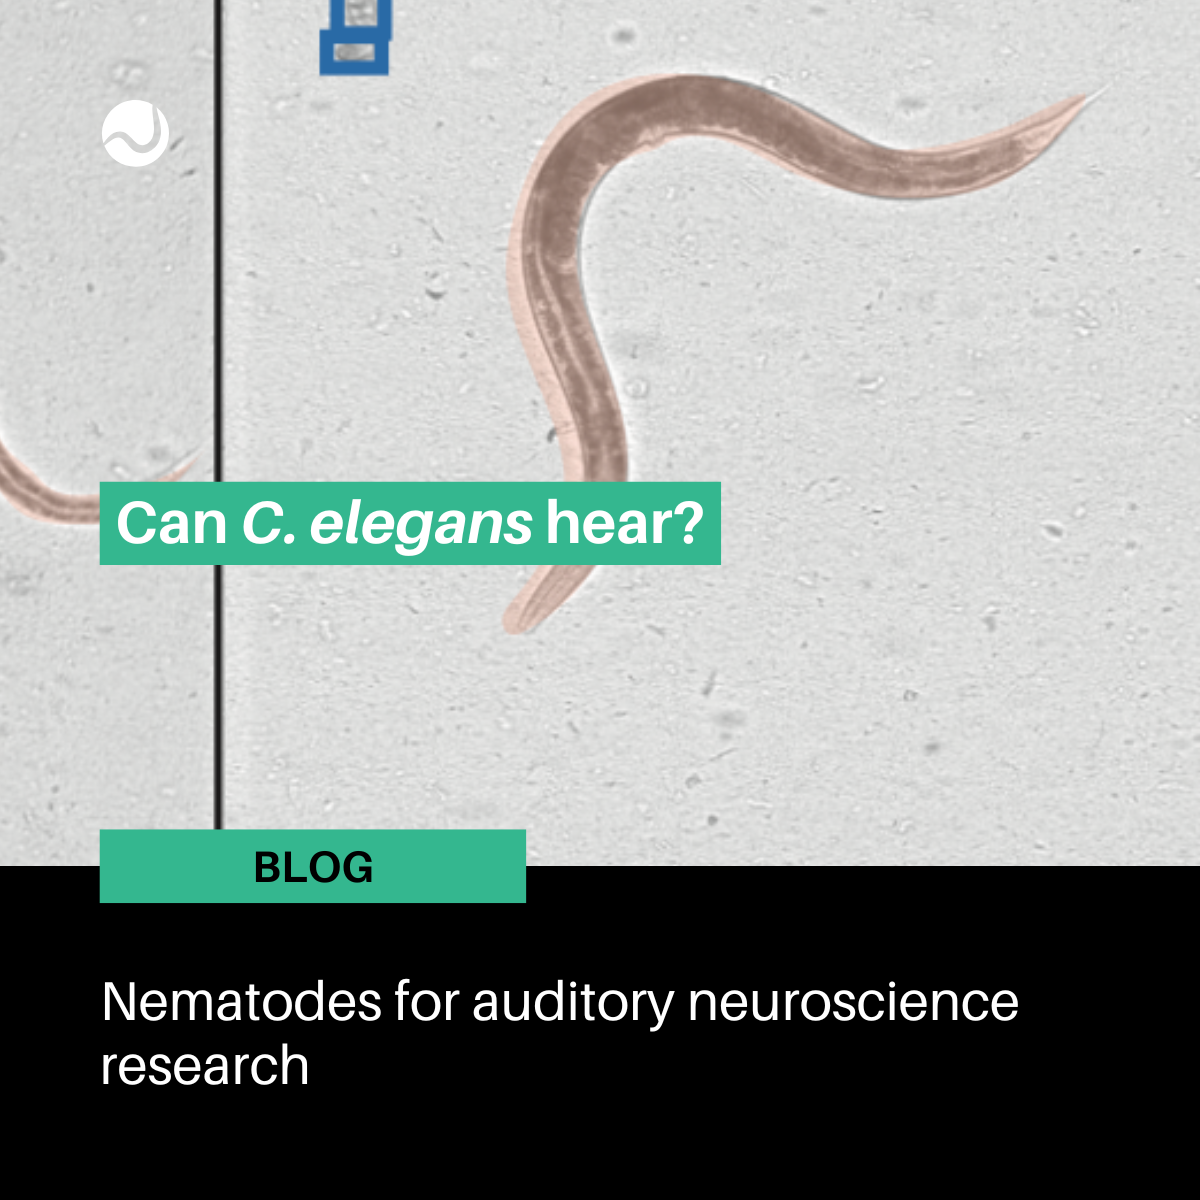 Hearing in C. elegans Can C. elegans hear? Nematodes for auditory neuroscience research